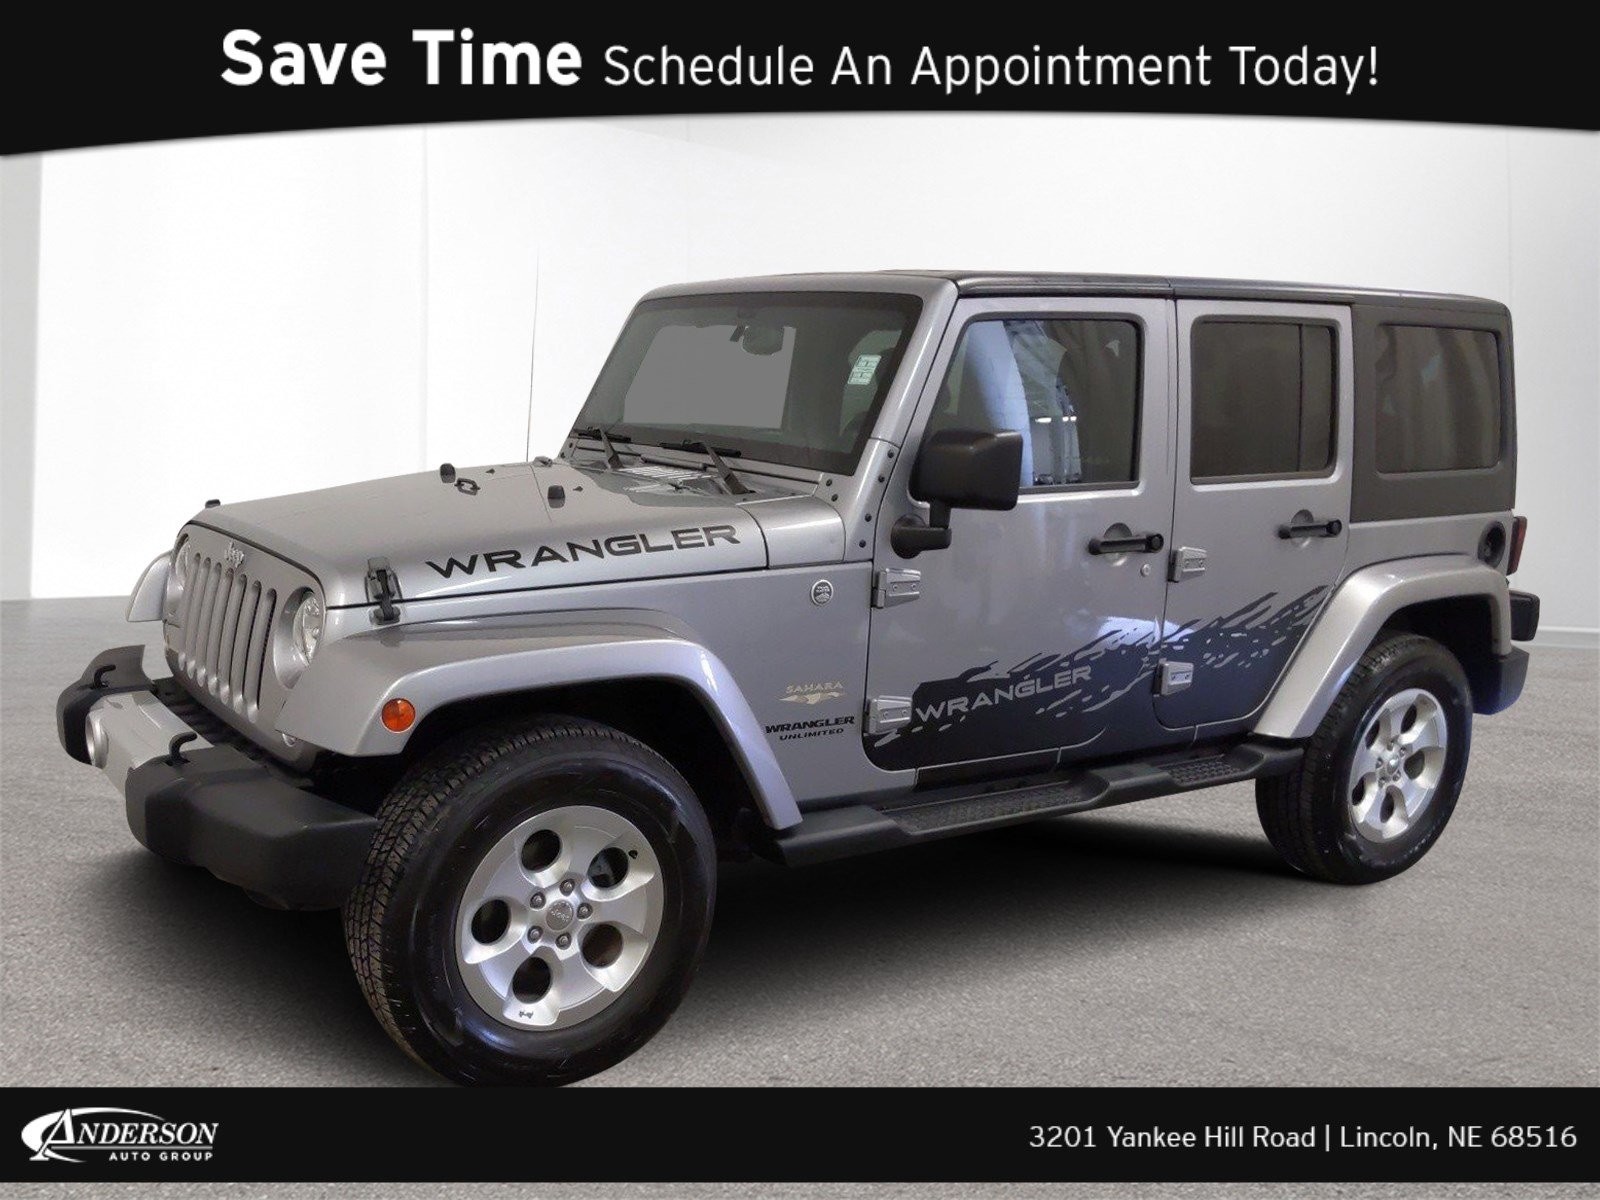 2007 Jeep Wrangler Parts Diagram Pre Owned 2014 Jeep Wrangler Unlimited Sahara Convertible In Lincoln Of 2007 Jeep Wrangler Parts Diagram